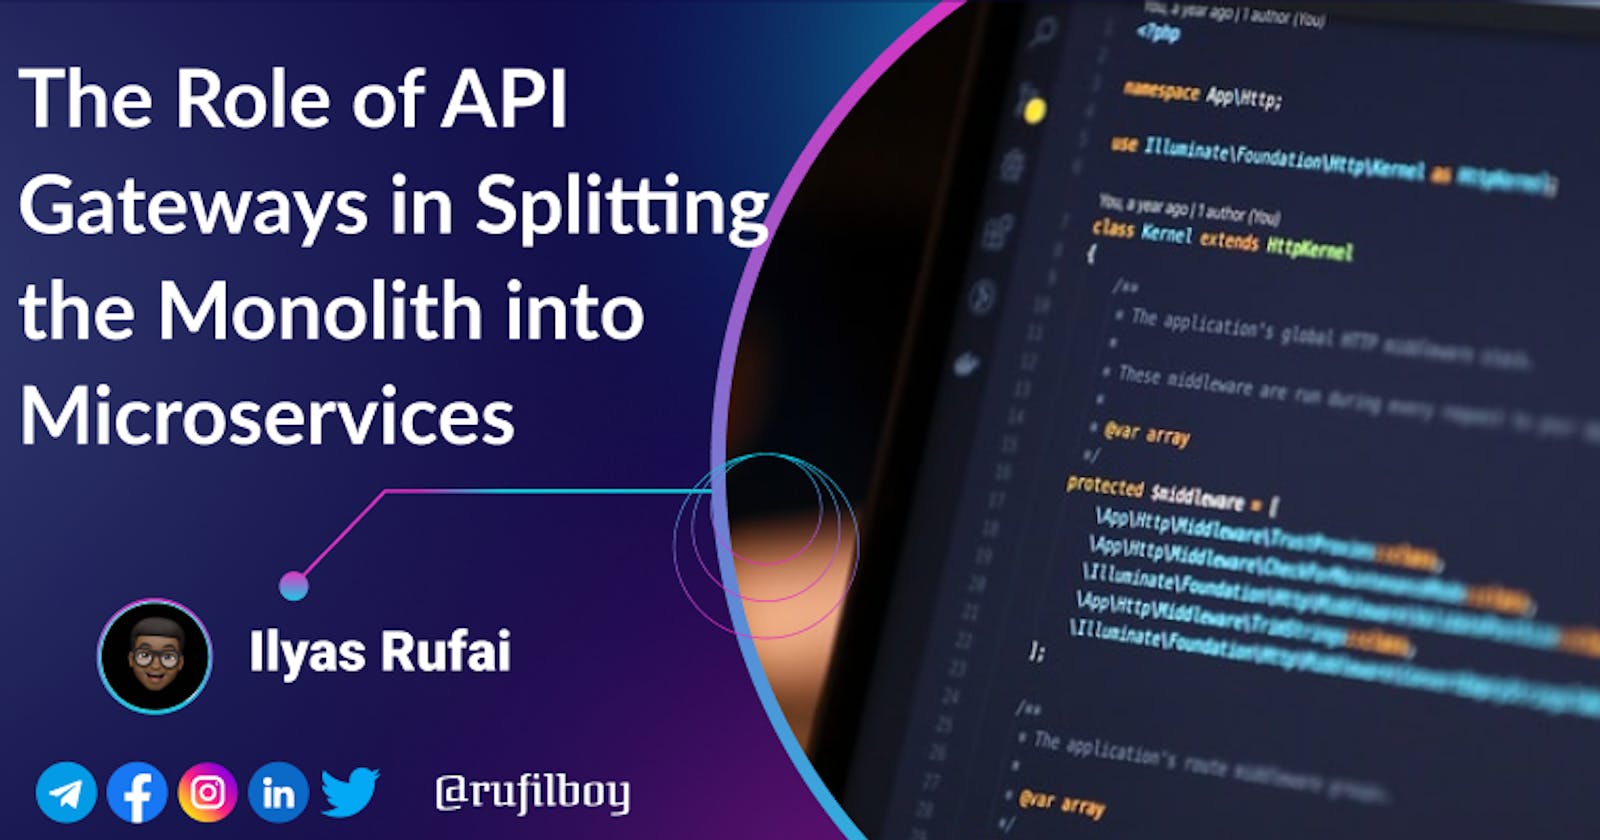 Day 89 -The Role of API Gateways in Splitting the Monolith into Microservices